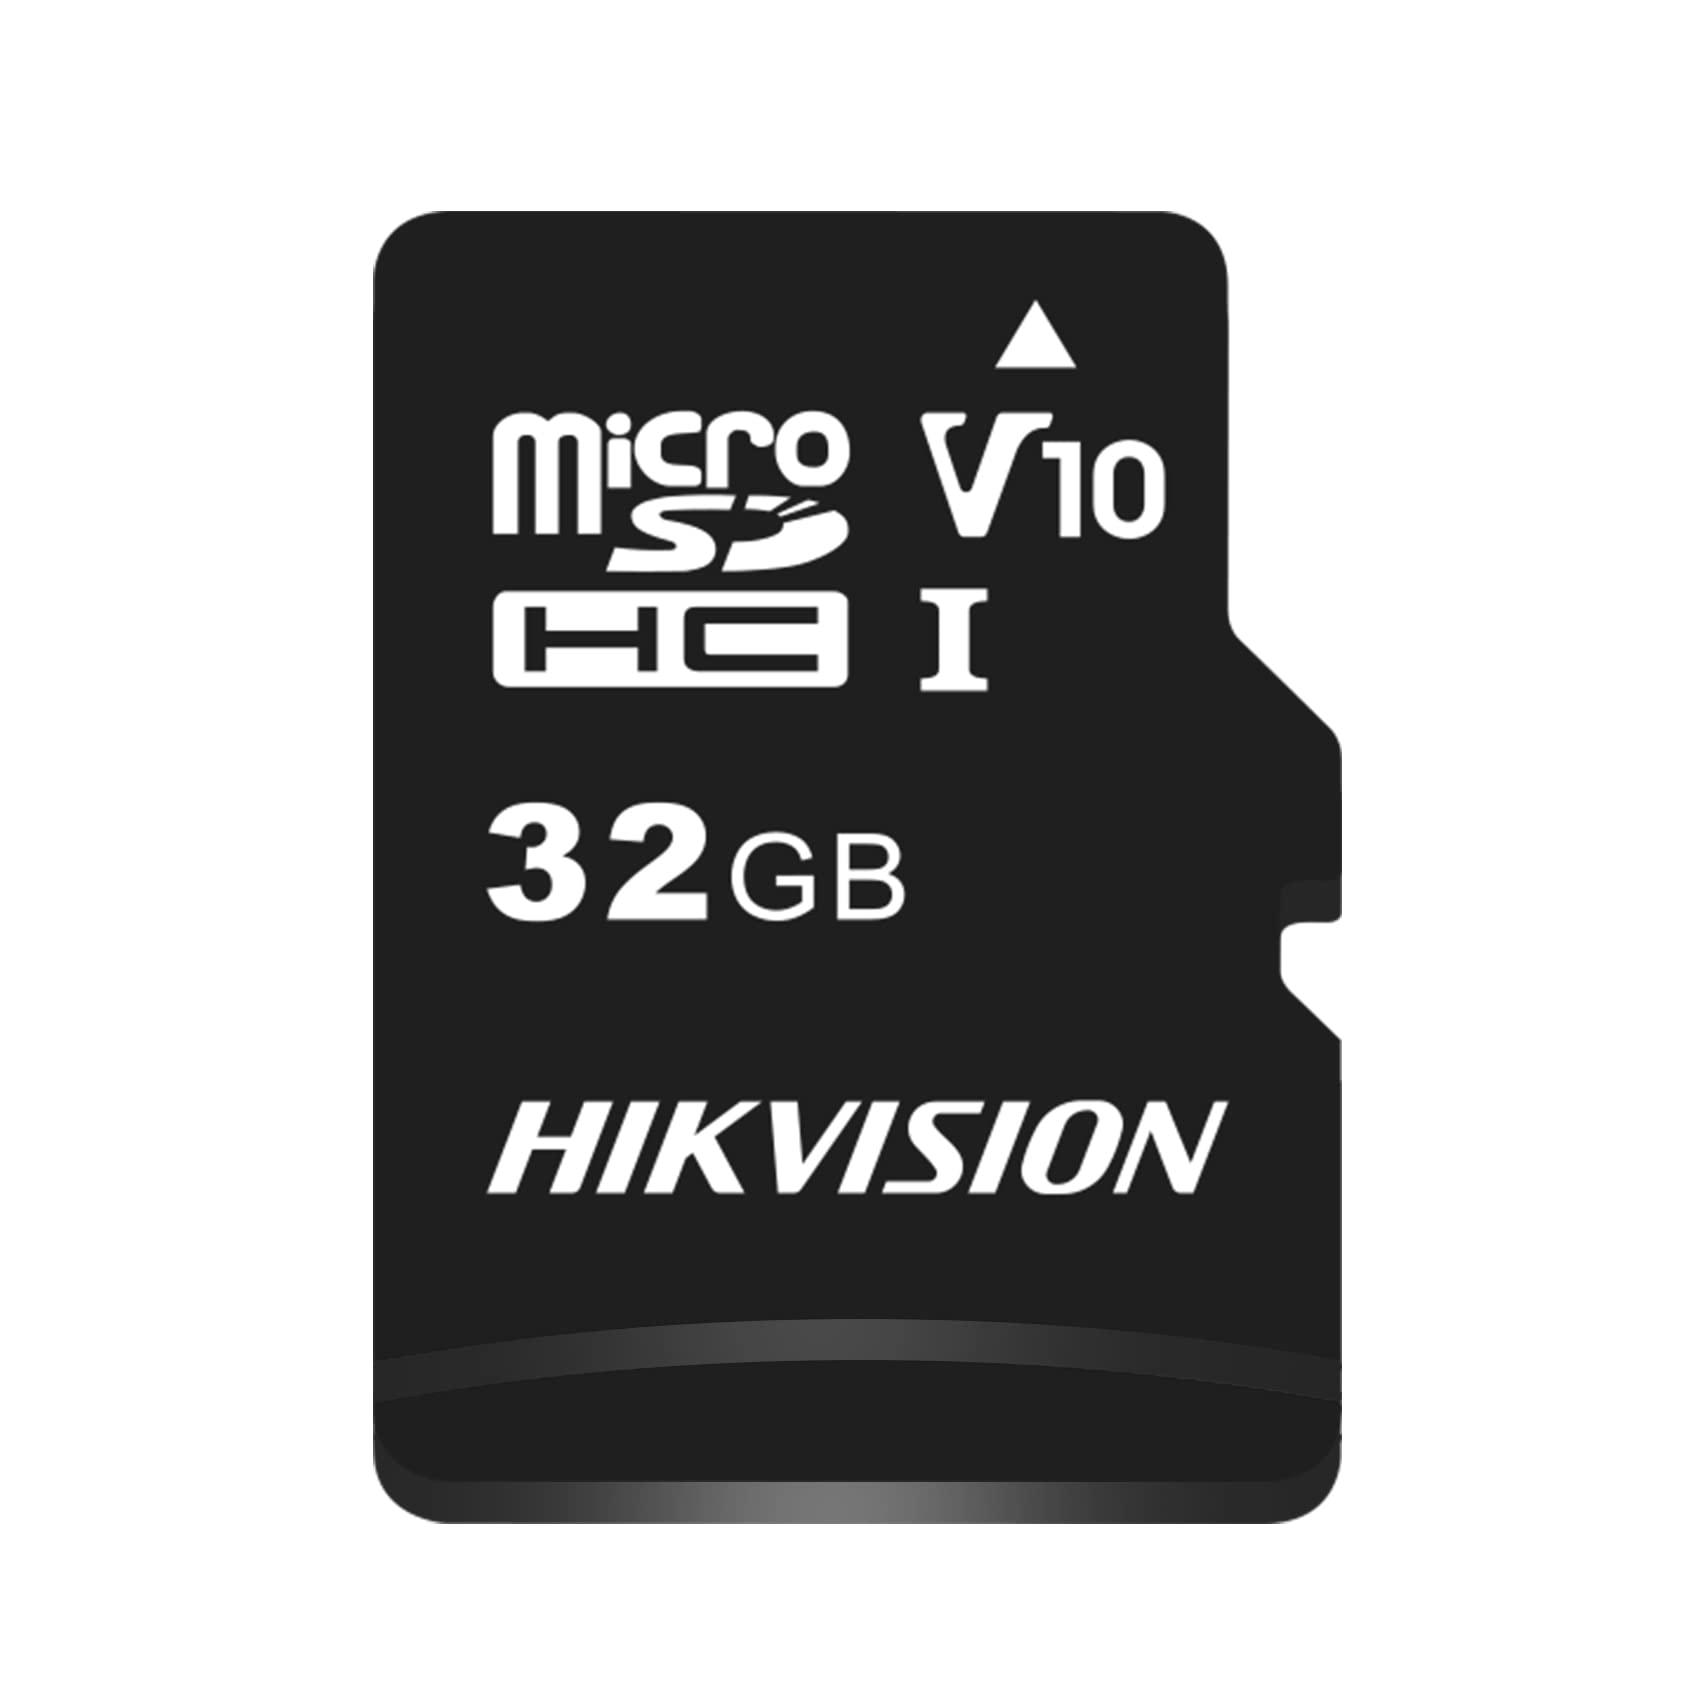 Everything But Stromboli hikvision 32g micro sd card,flash memory card for mobile phone, tablet, drone & full hd video recording, mini sd card up to 9